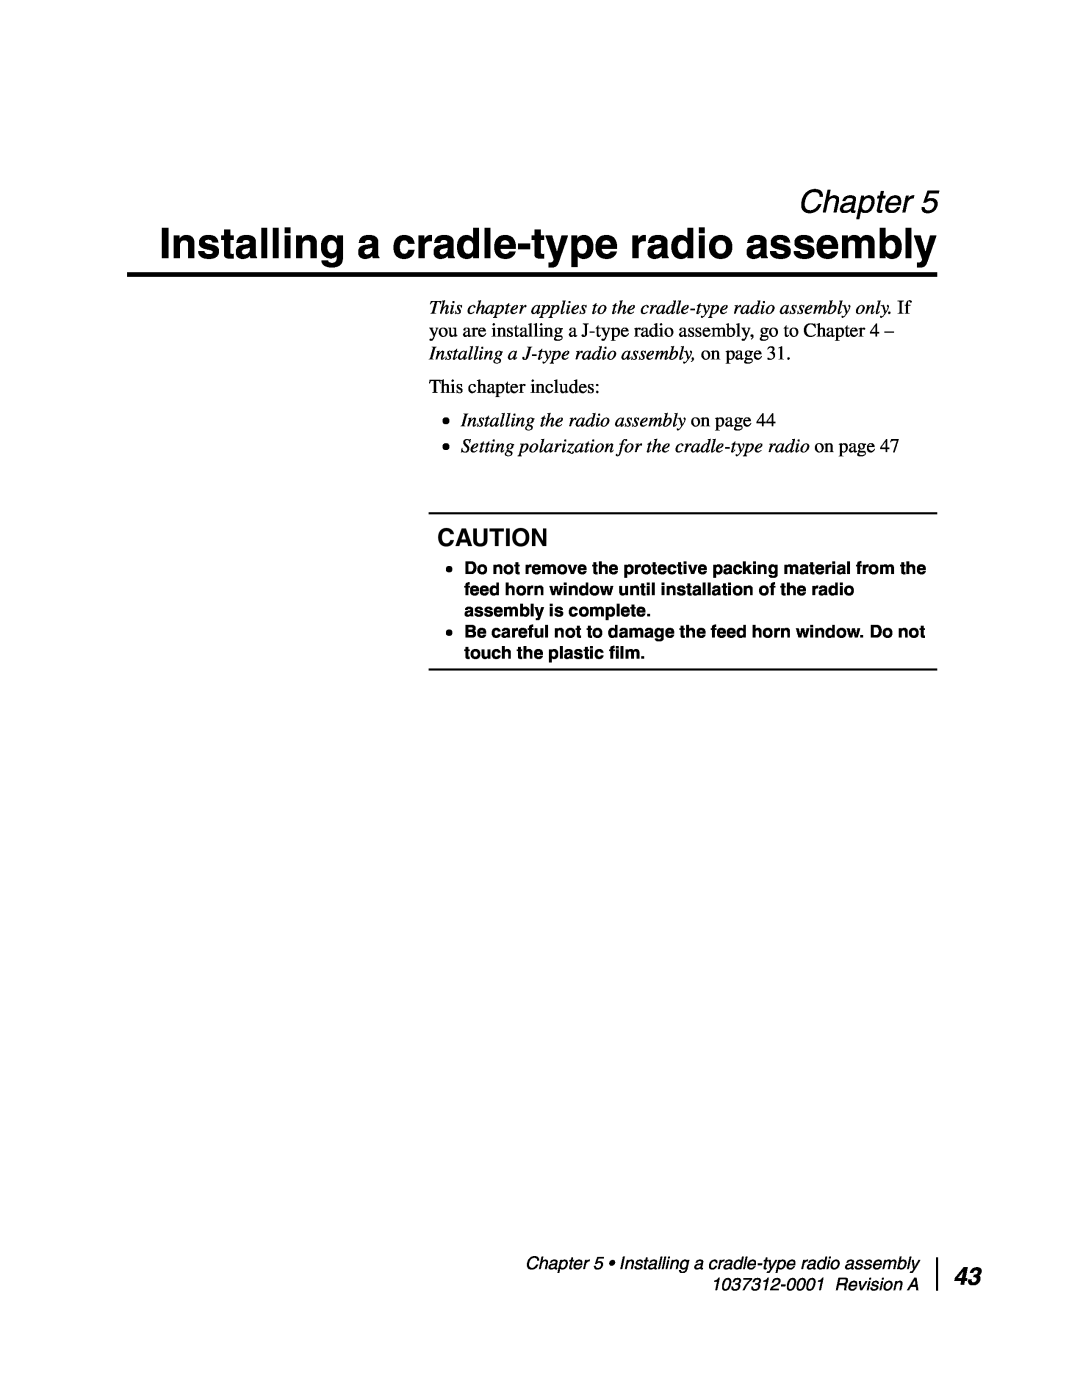 Hughes AN6-098P installation manual Installing a cradle-typeradio assembly, Chapter 